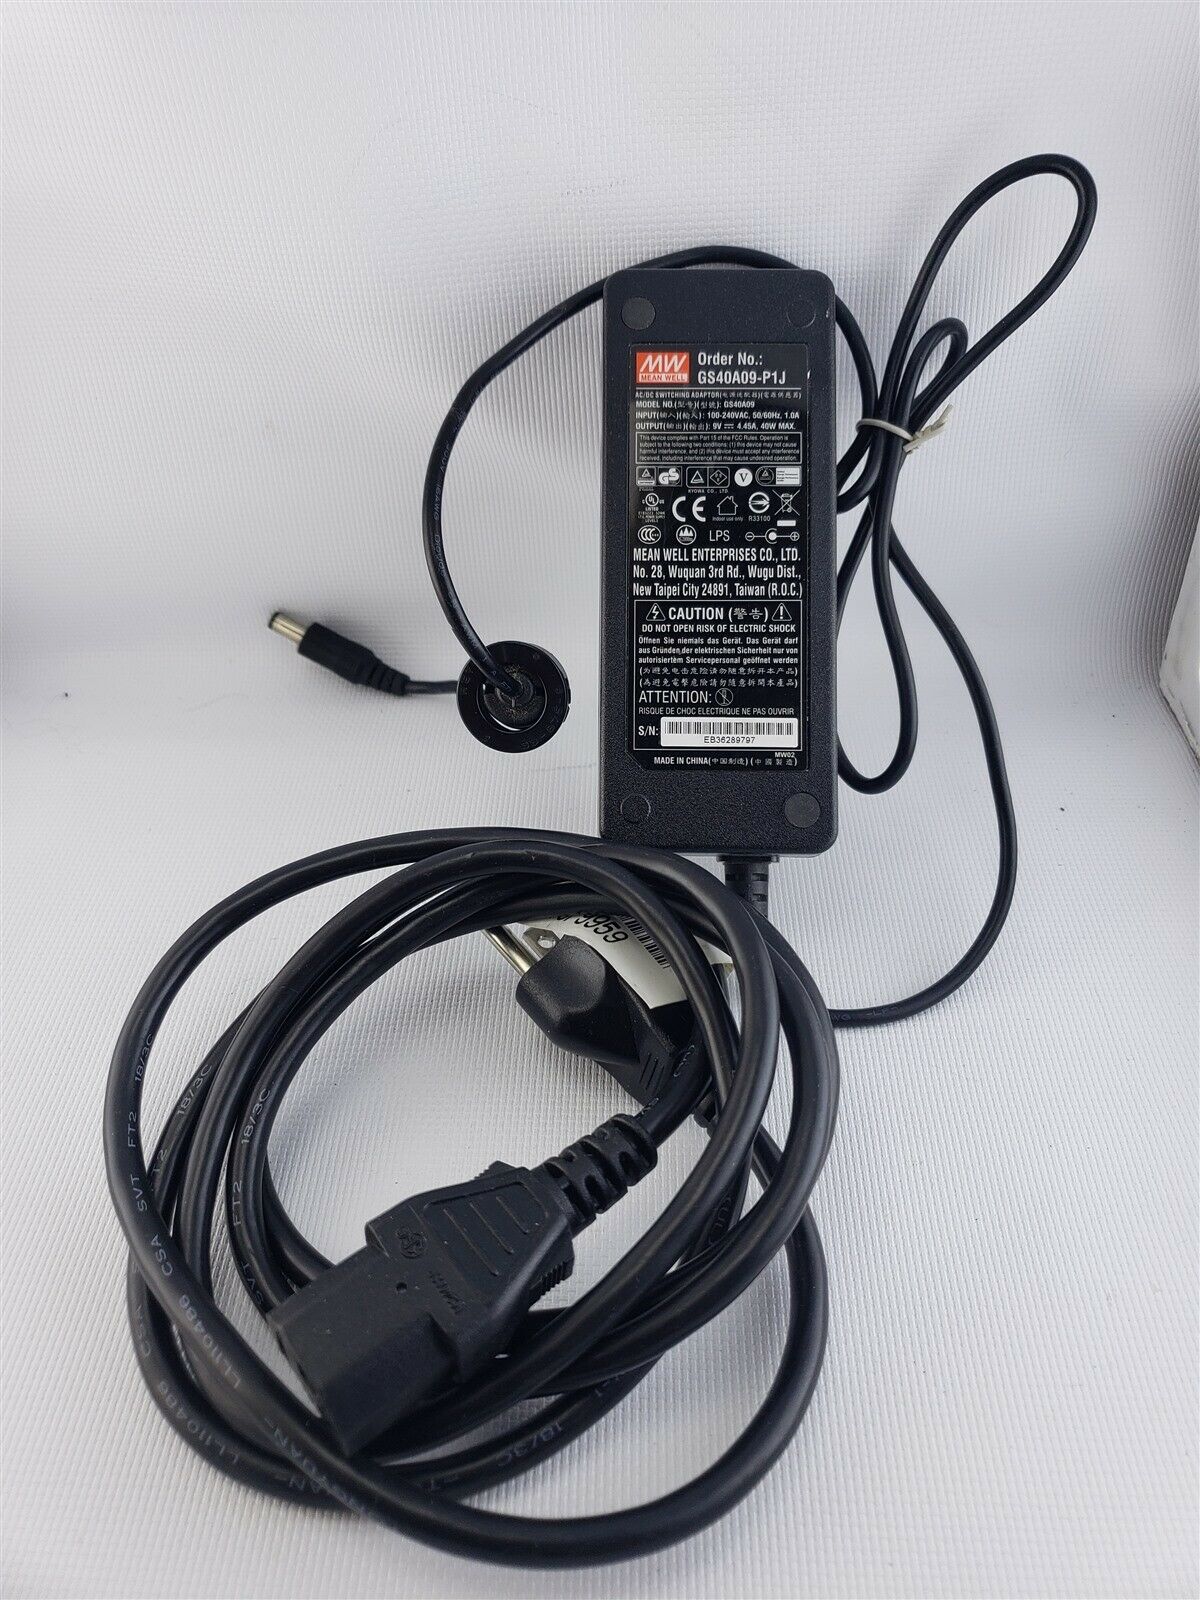 New Original OEM 12V 4A AC Adapter&Cord for MSI Optix MAG27C LED Gaming Monitor@ Country/Region of Manufacture: China